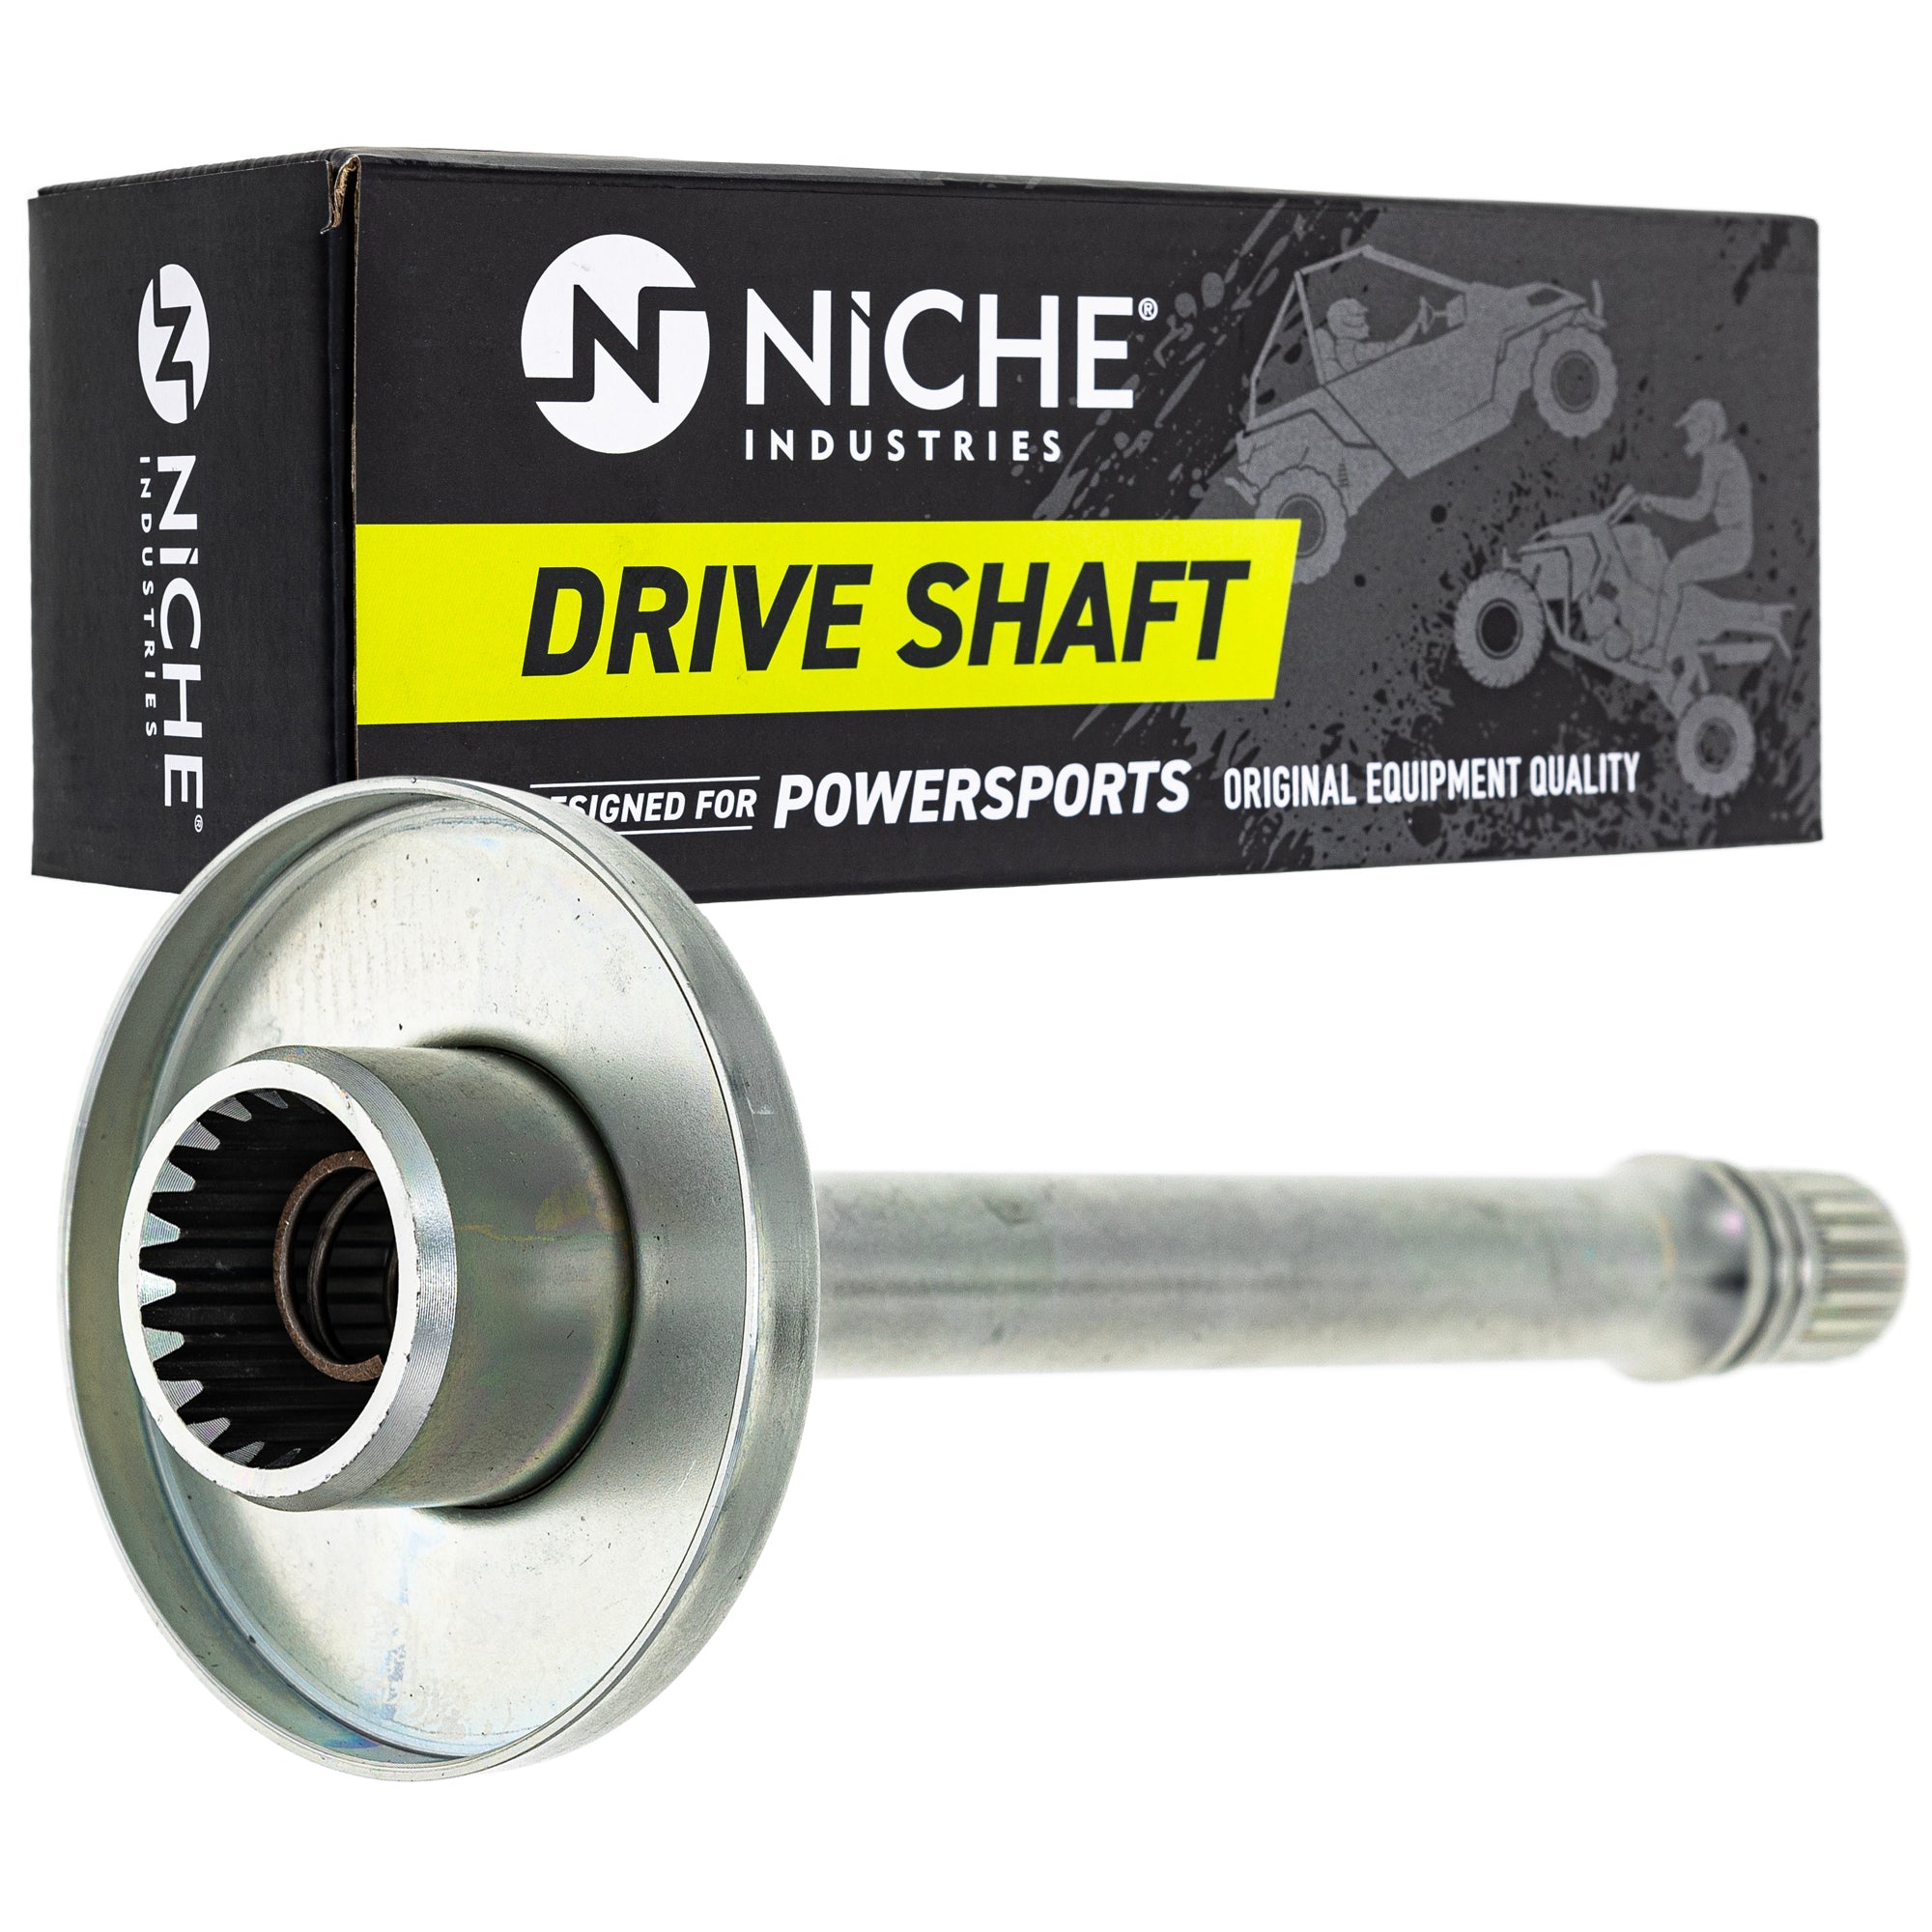 NICHE MK1012019 Drive Shaft Kit for zOTHER FourTrax